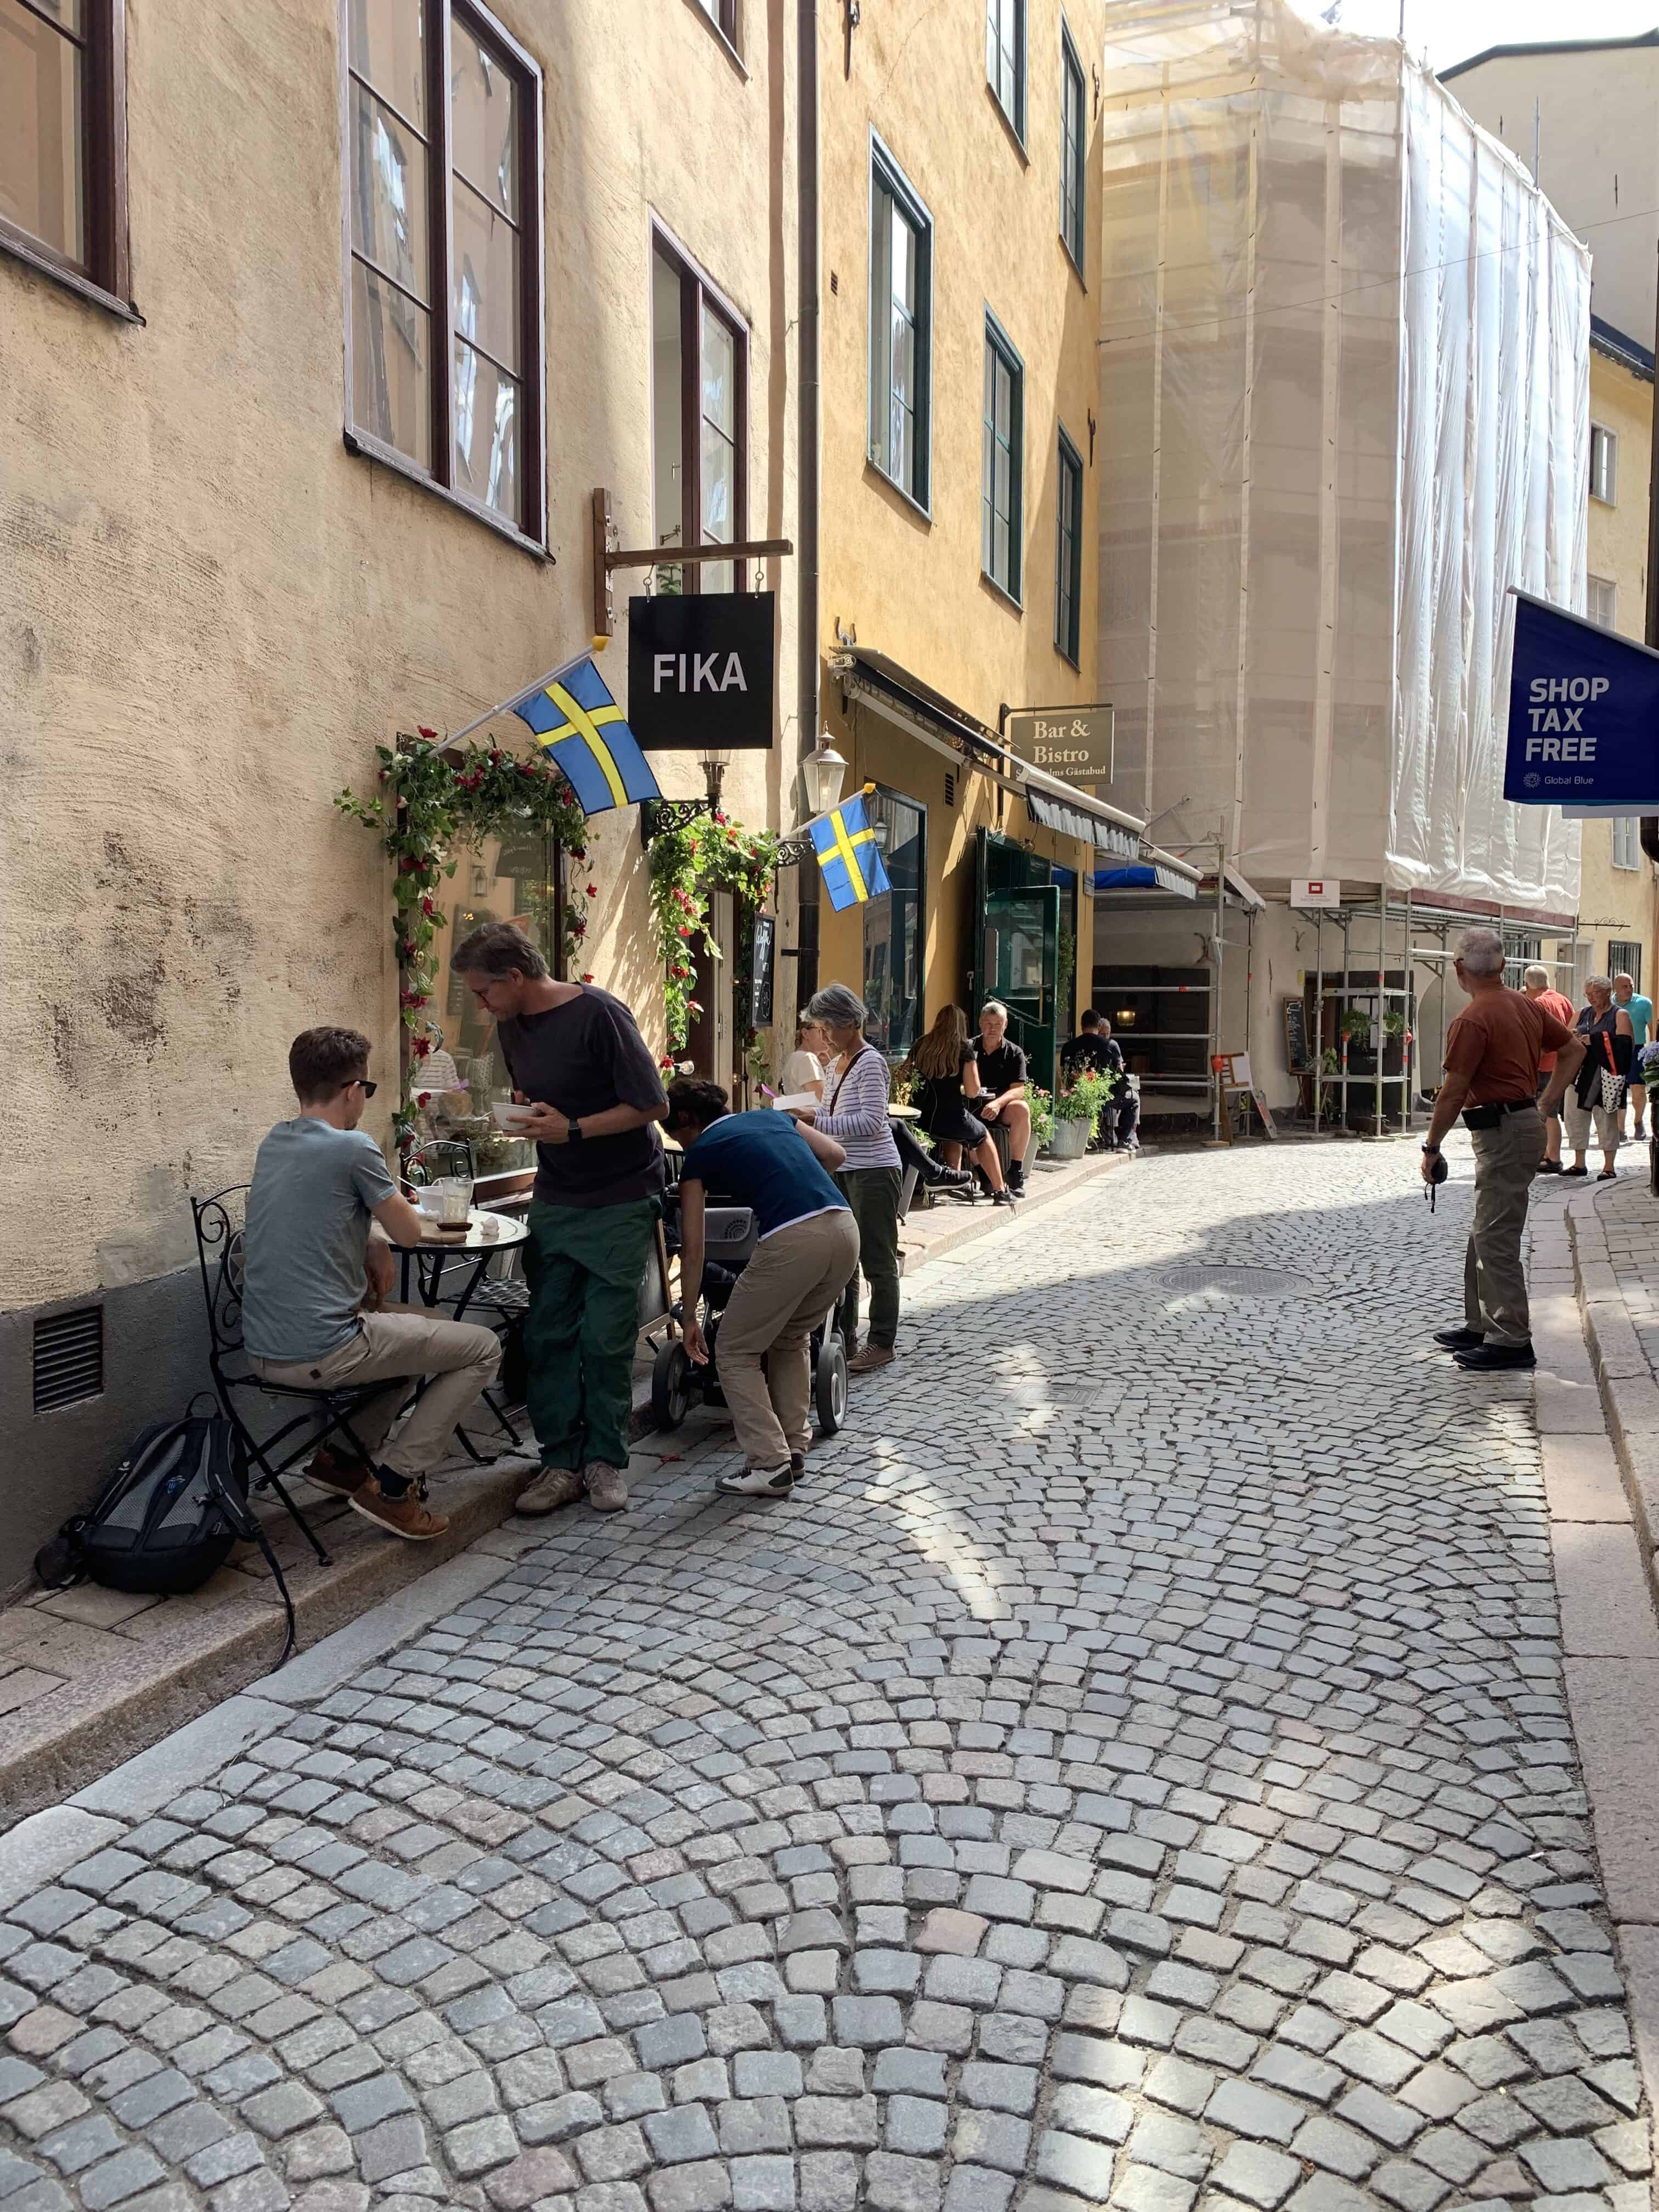 Beyond Ikea & meatballs How to have an amazing adventure in Stockholm